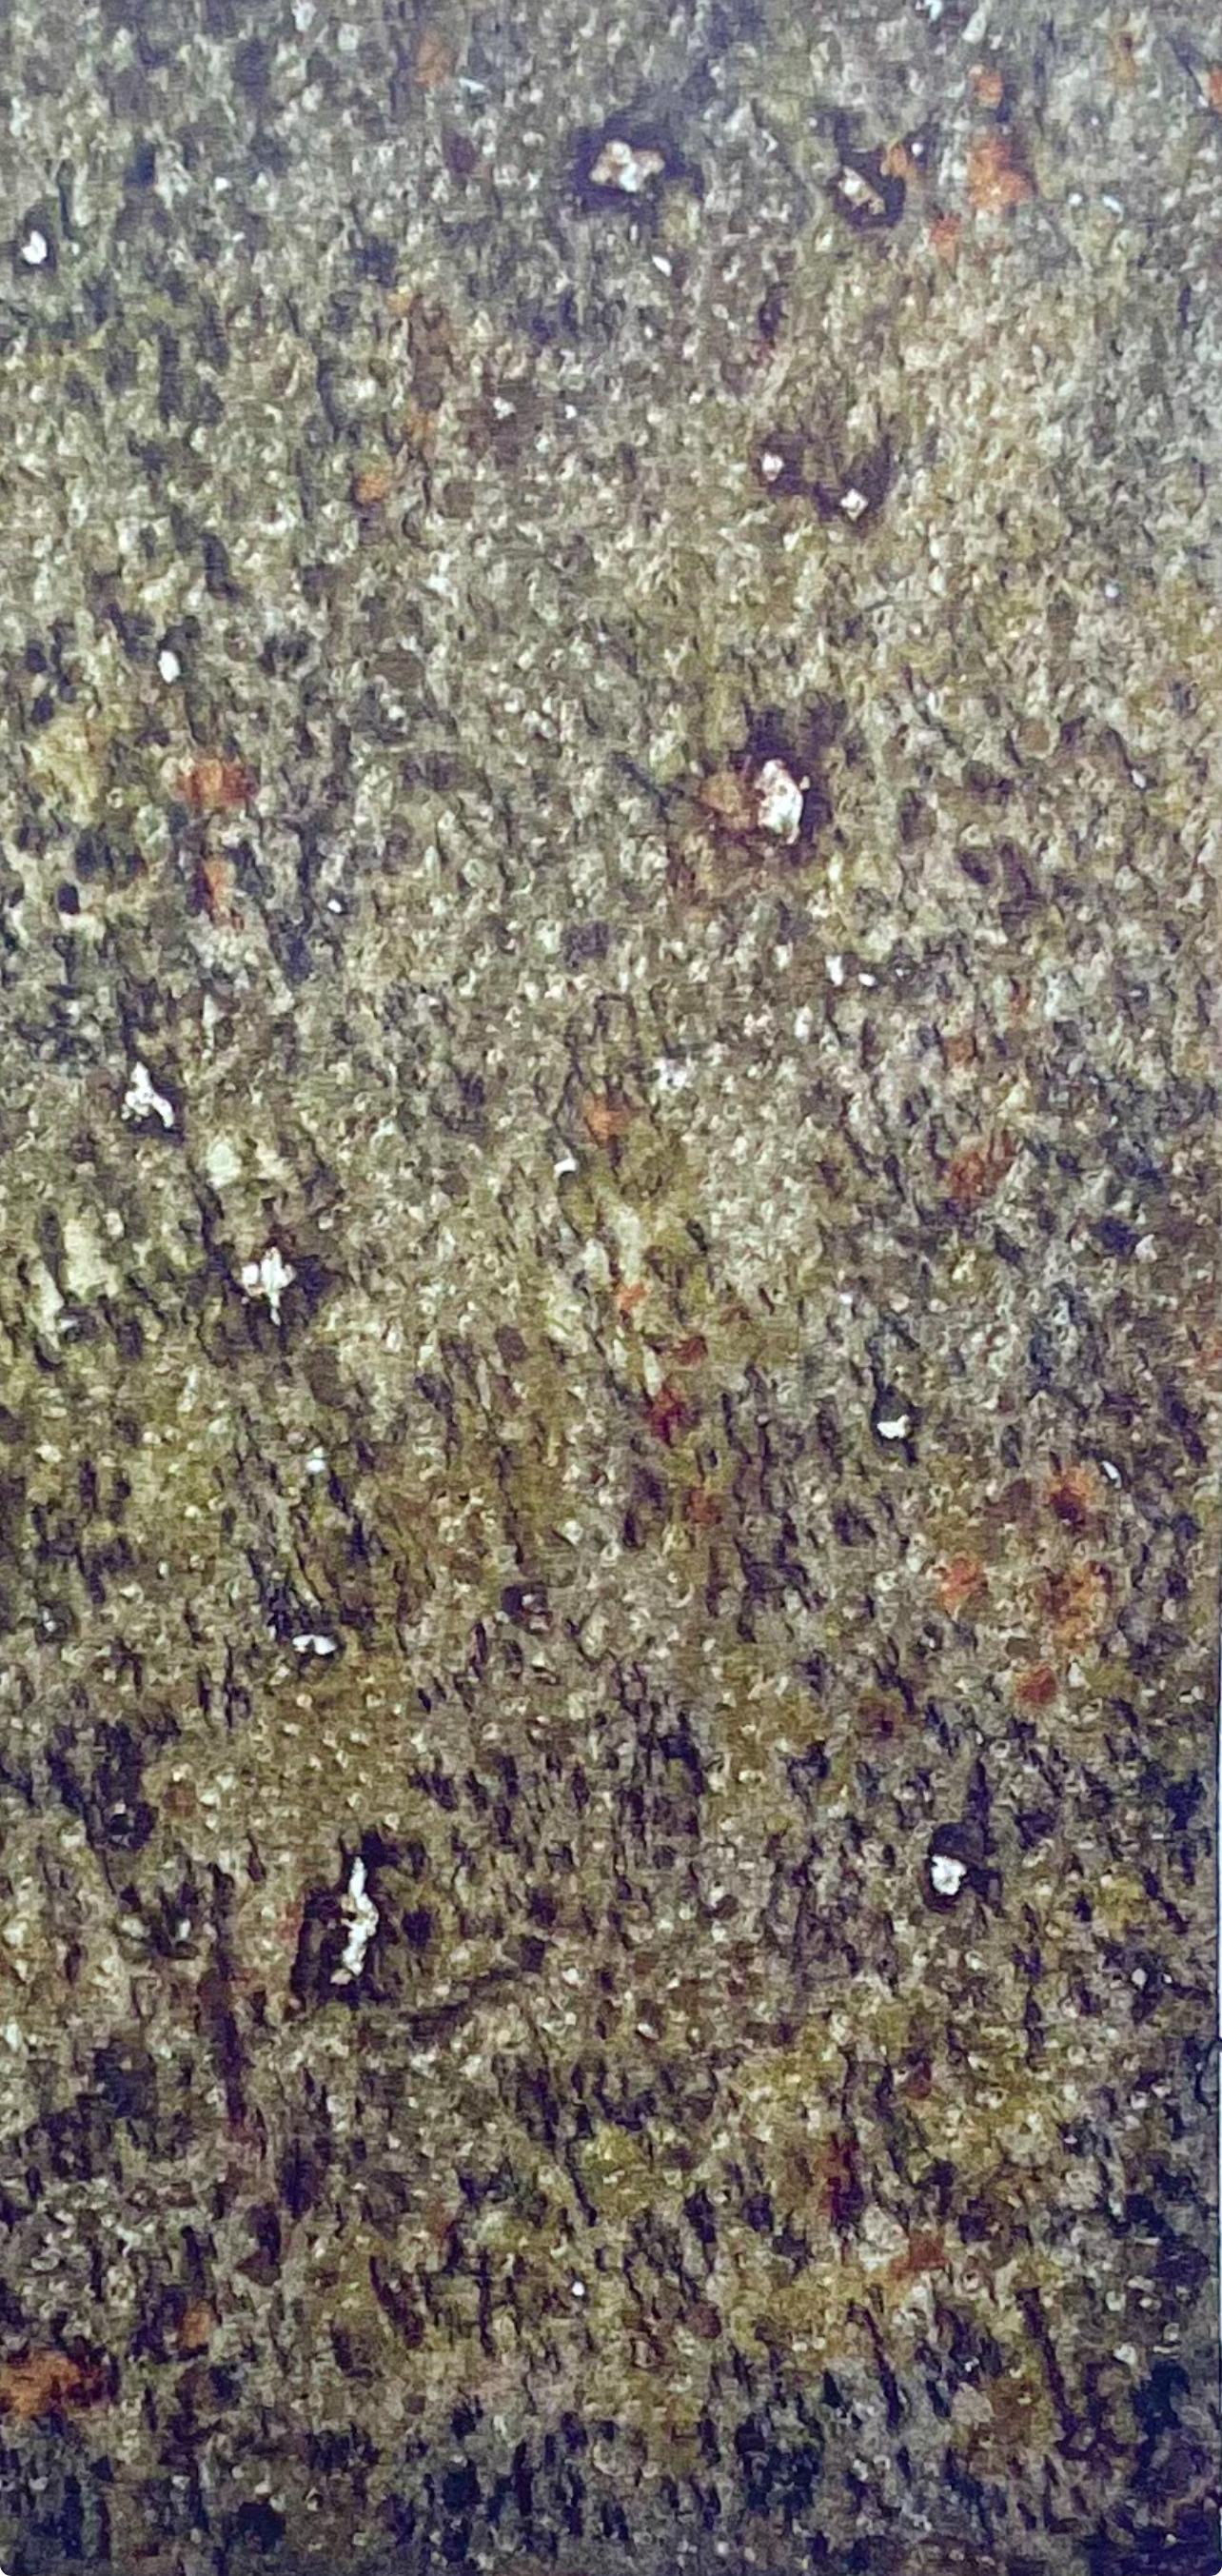 Tobey, L'automne, Mark Tobey: Peintres d'aujourd'hui (after) For Sale 3